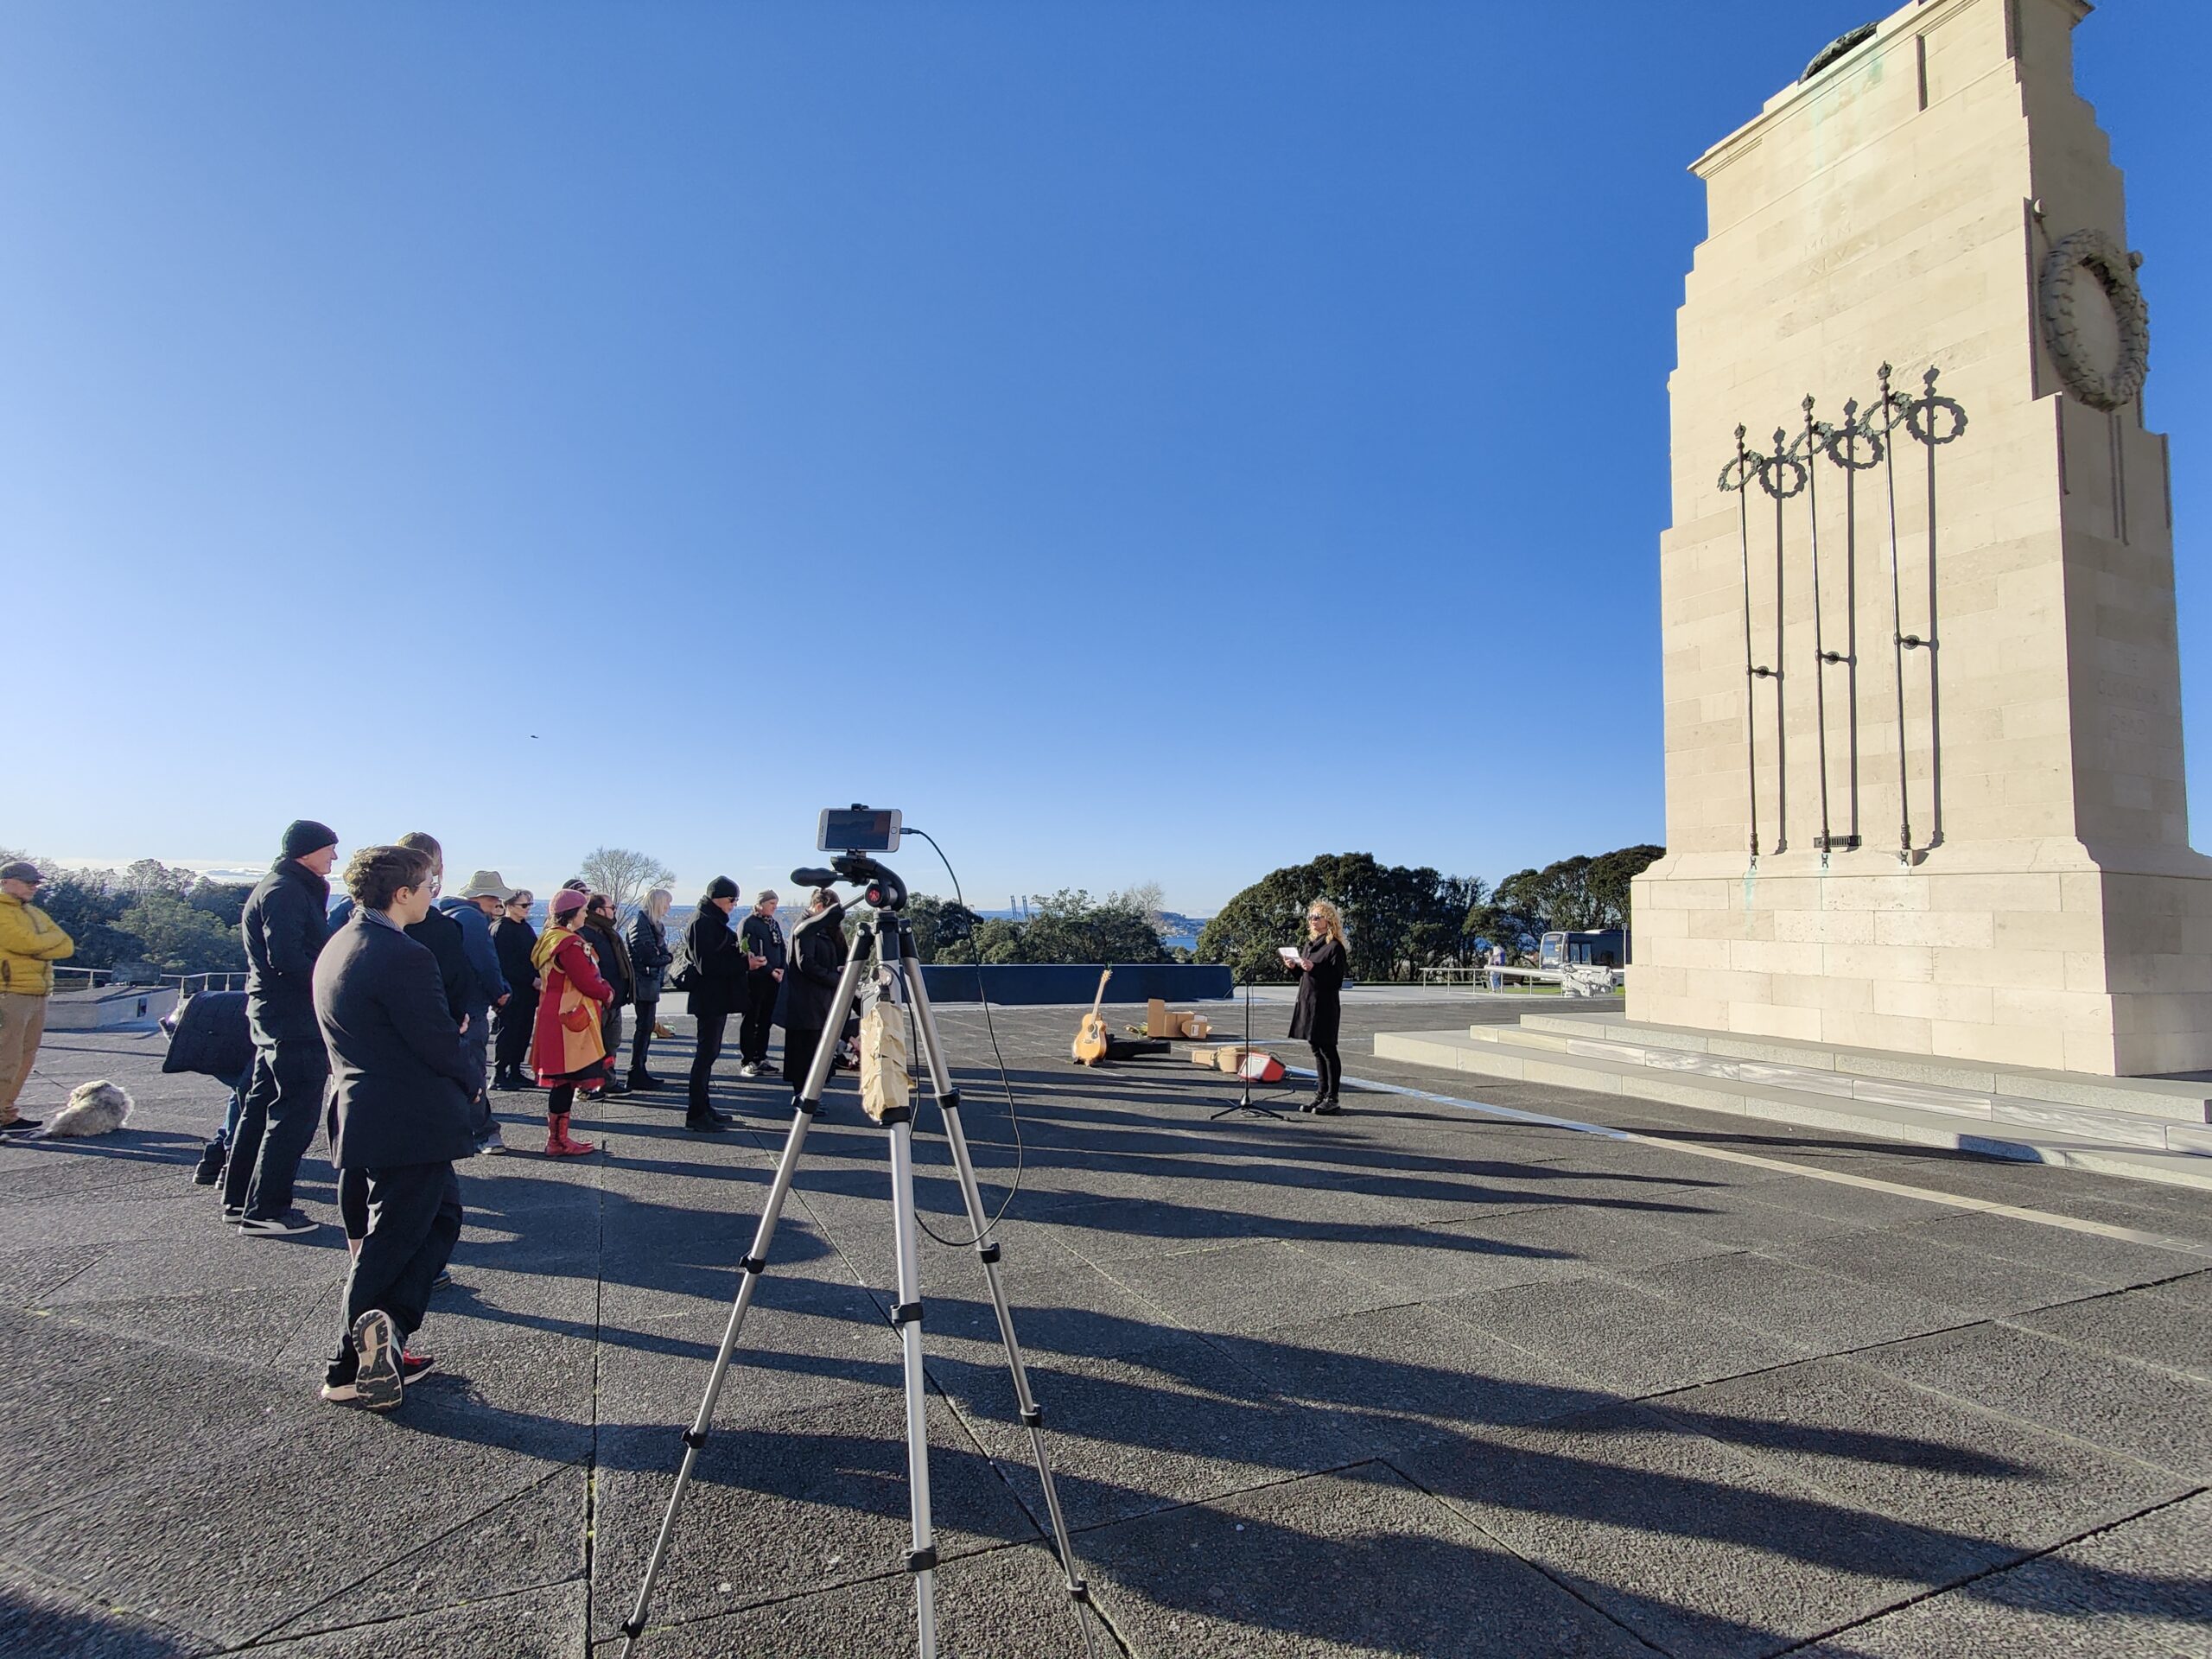 A group of around 25 people listen to a woman speaking into a microphone in front of a cenotaph